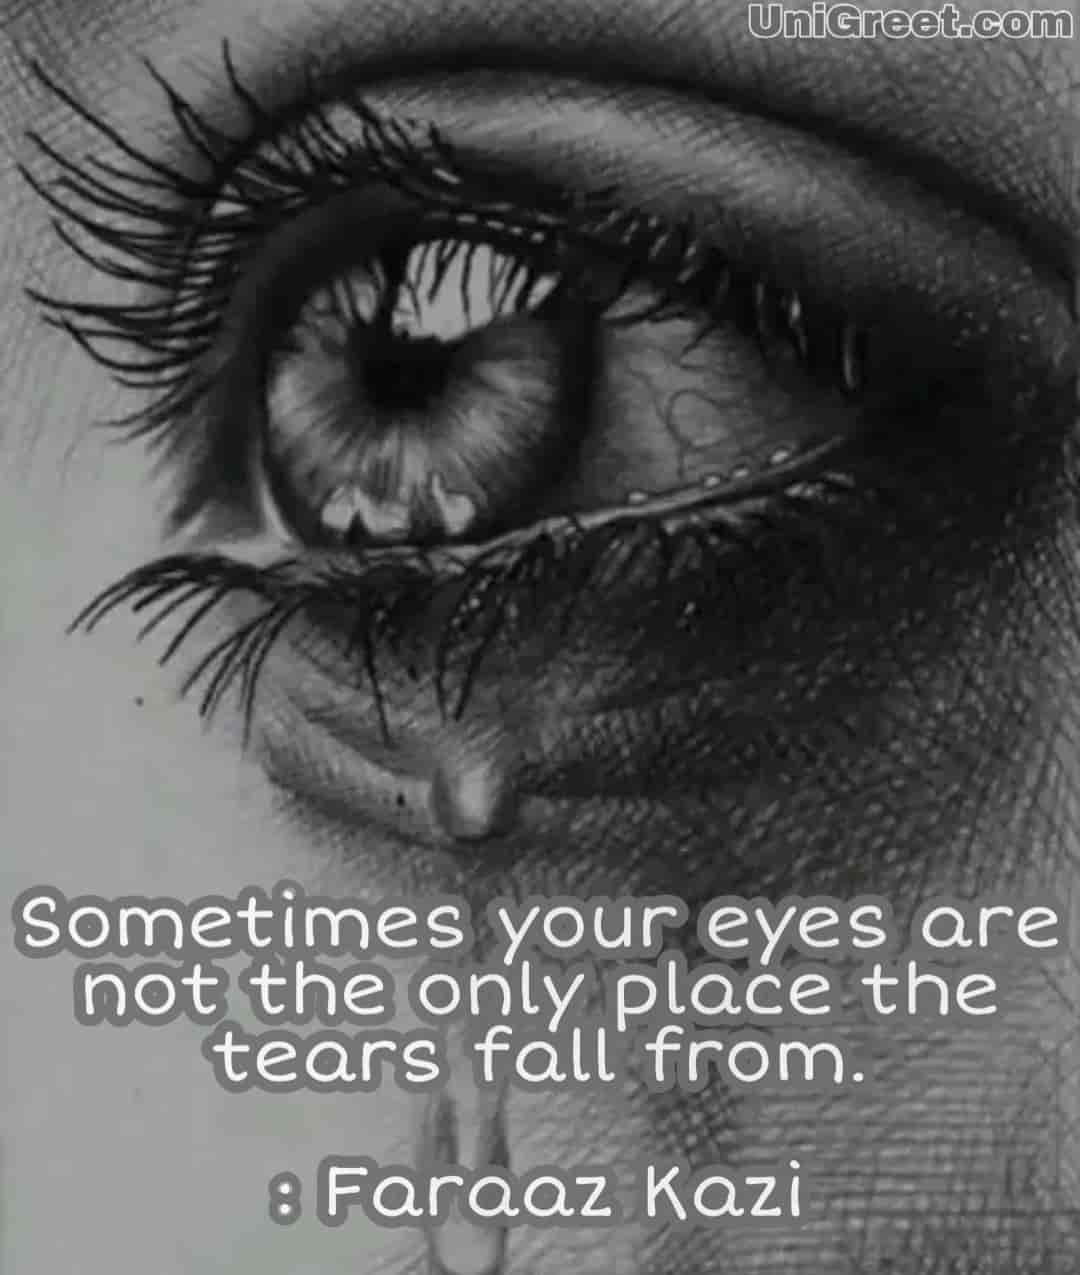 sad love quotes wallpapers for boyfriend